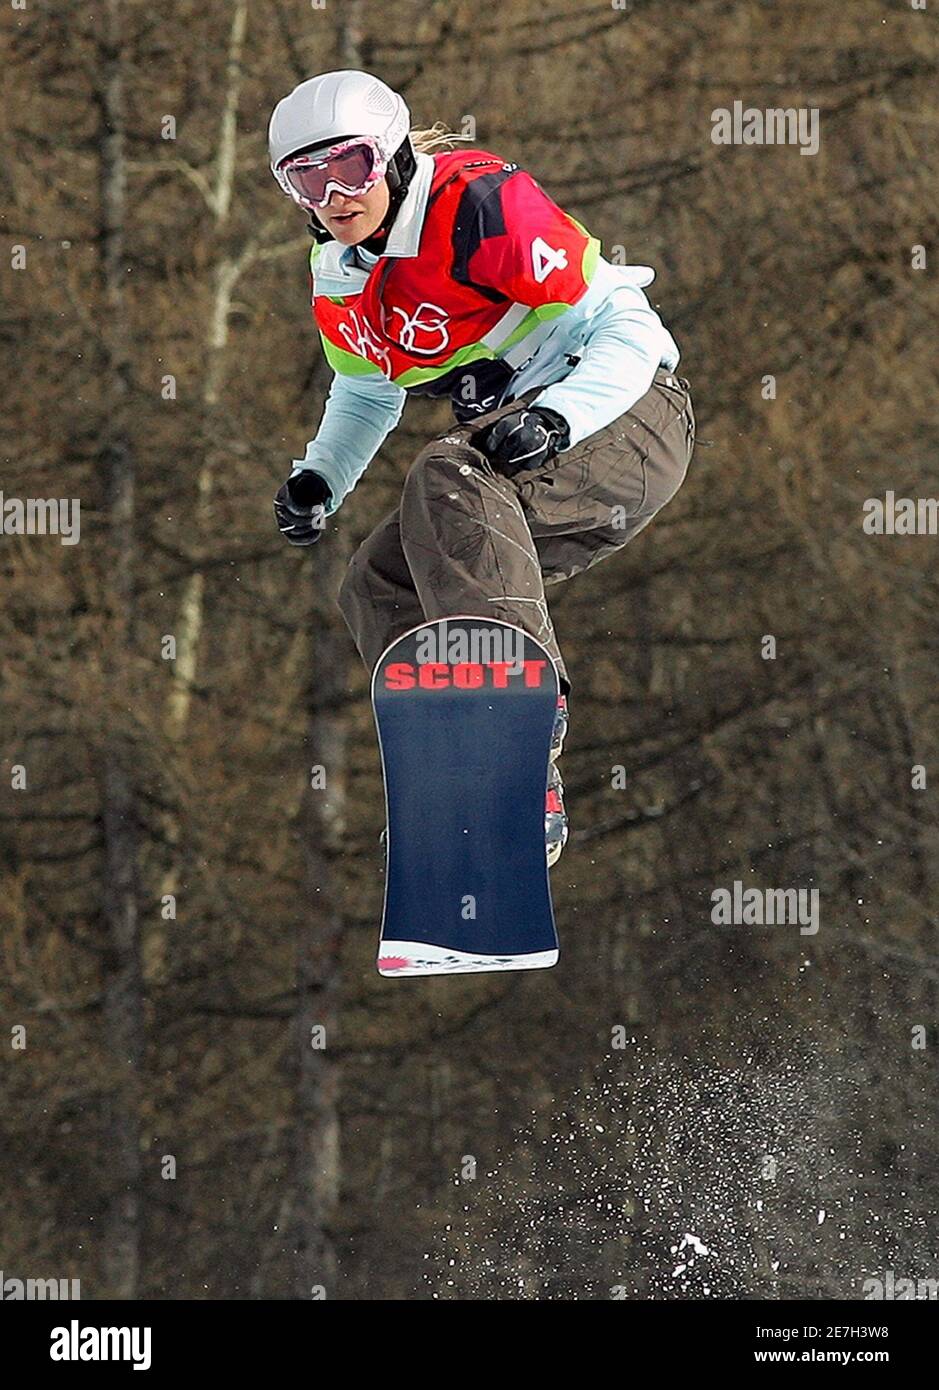 Switzerland's Tanja Frieden competes during the final of the women's snowboard cross competition at the Torino 2006 Winter Olympic Games in Bardonecchia, Italy February 17, 2006. Stock Photo